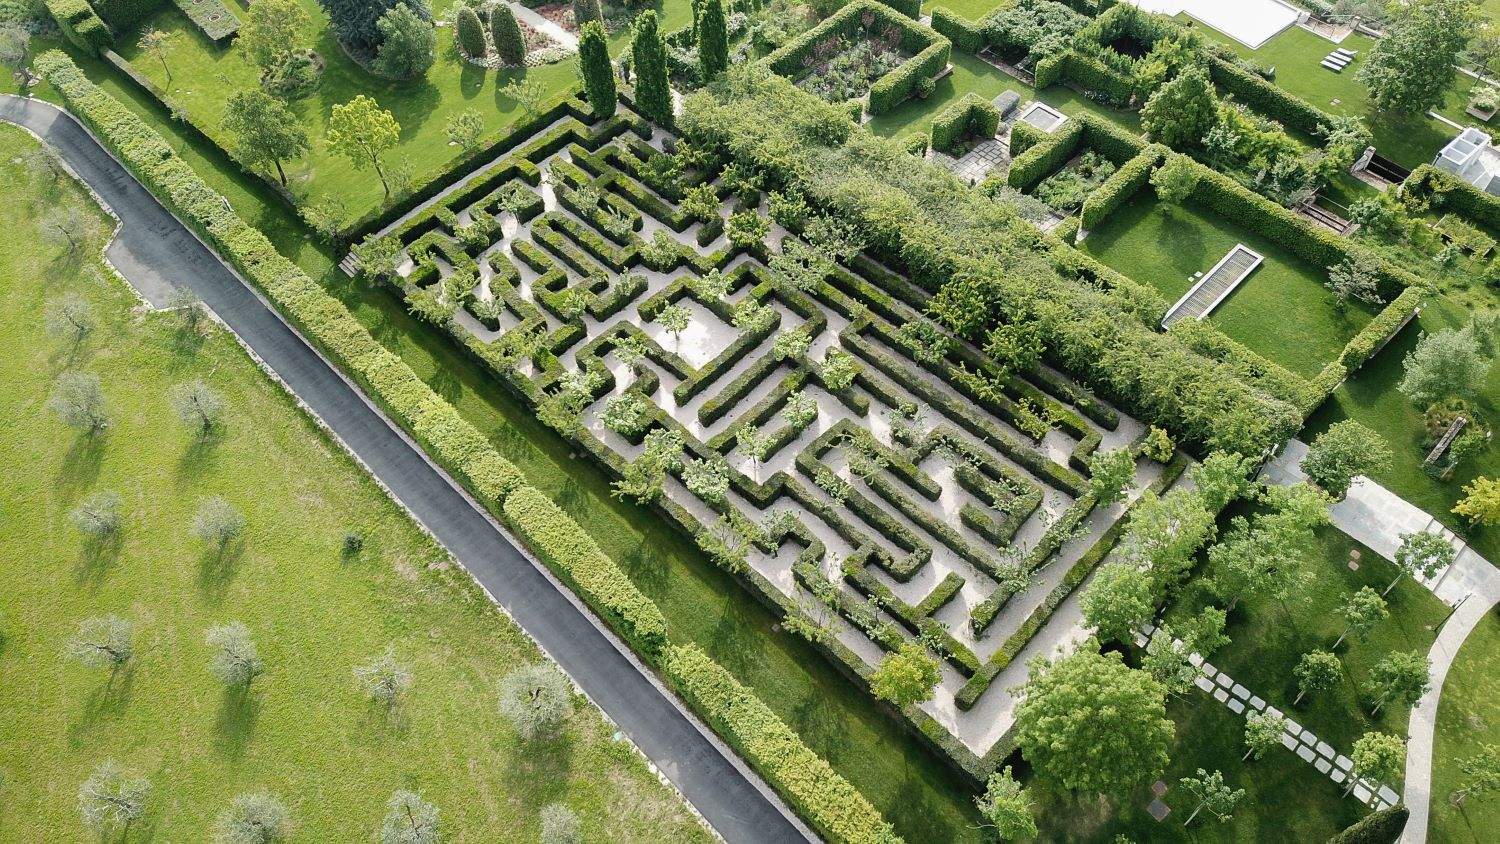 The Carlic Labyrinth, a maze in the orchard among the hills of Bologna